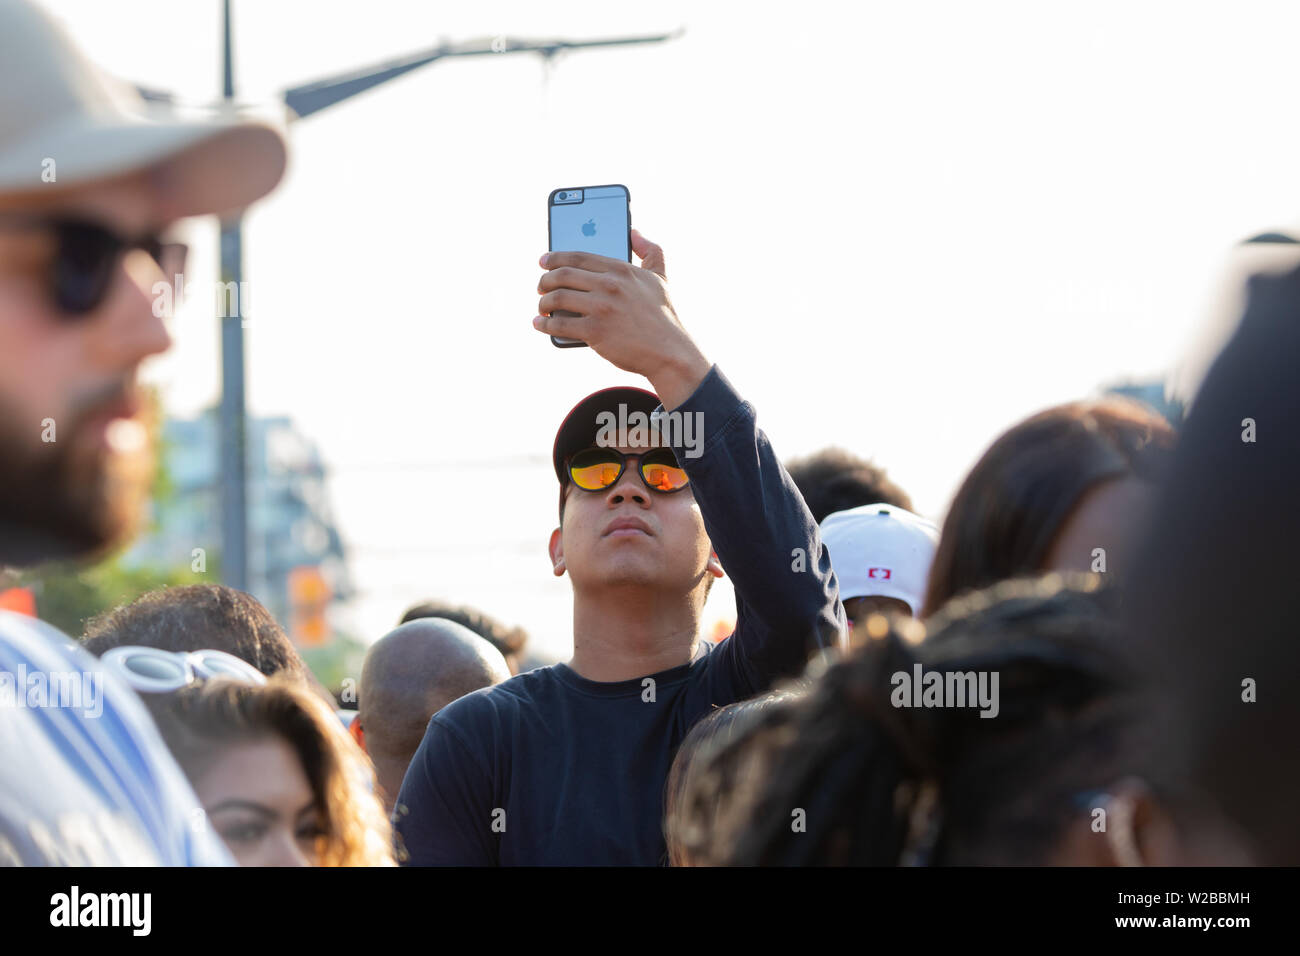 Toronto, Ontario / Canada - July 7 2019: Man Takes Selfie At The 15th Annual TD Salsa On St. Clair Street Festival Stock Photo